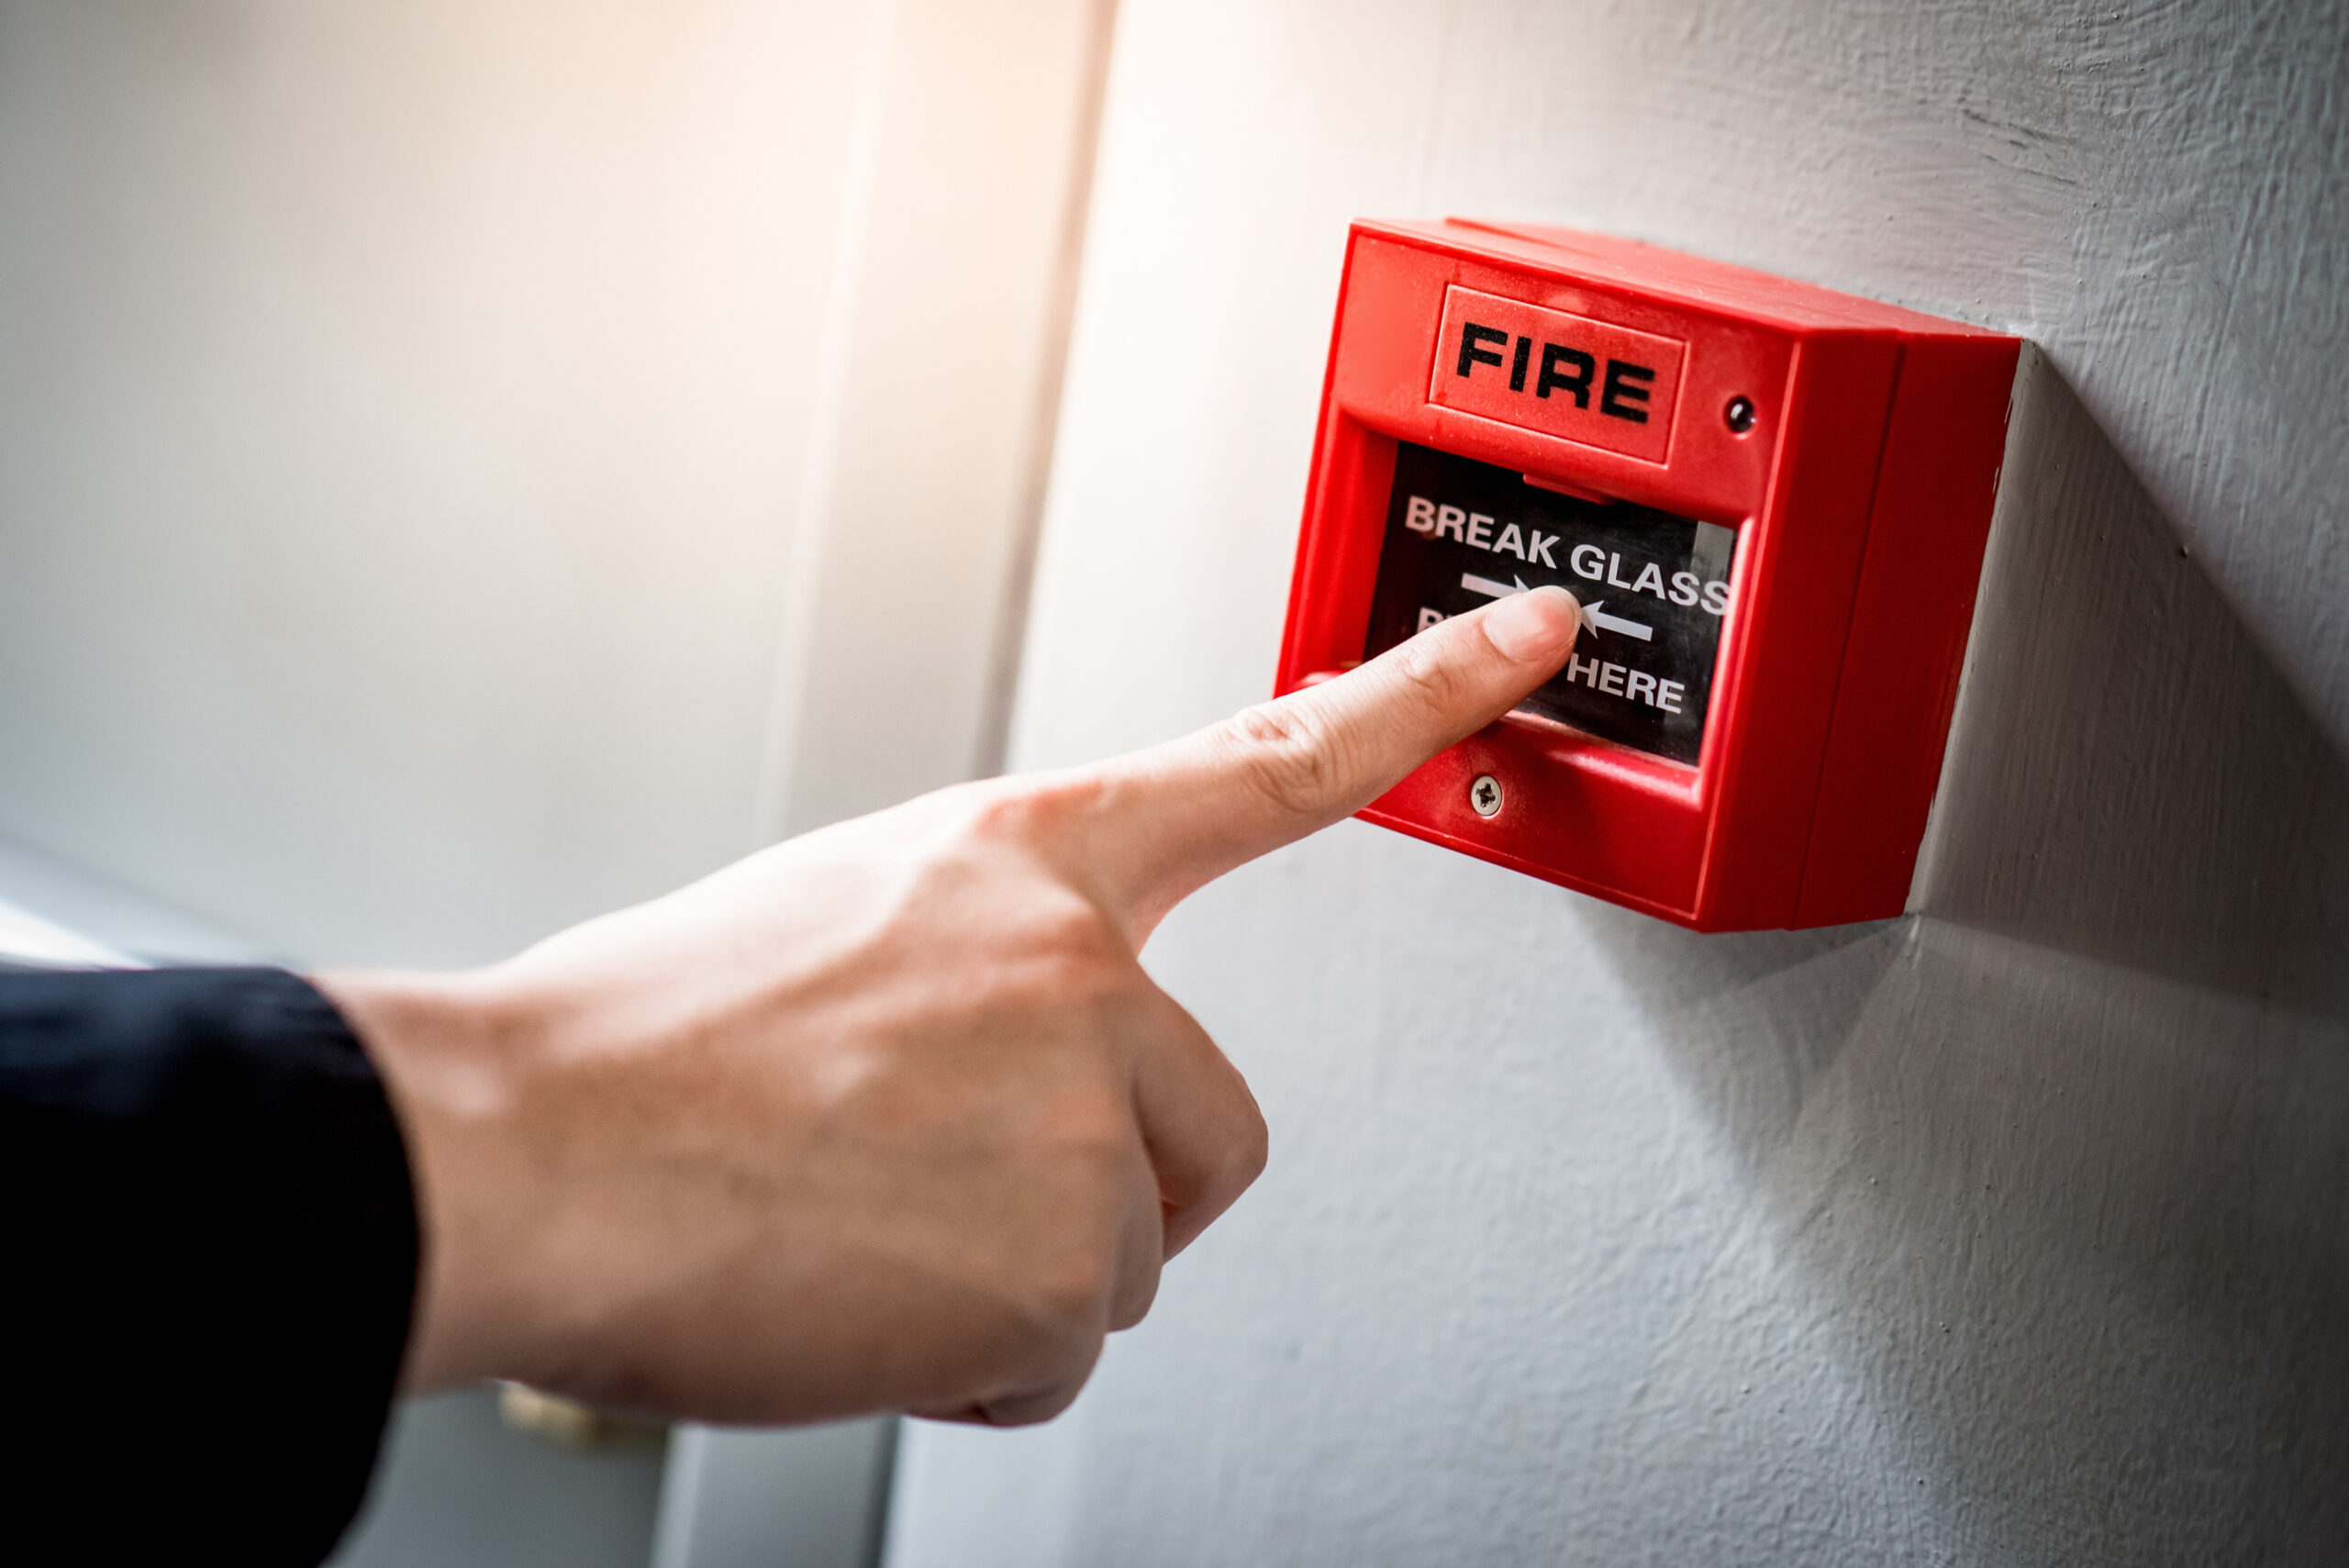 False alarms make up 98% of automatic fire alarm confirmed